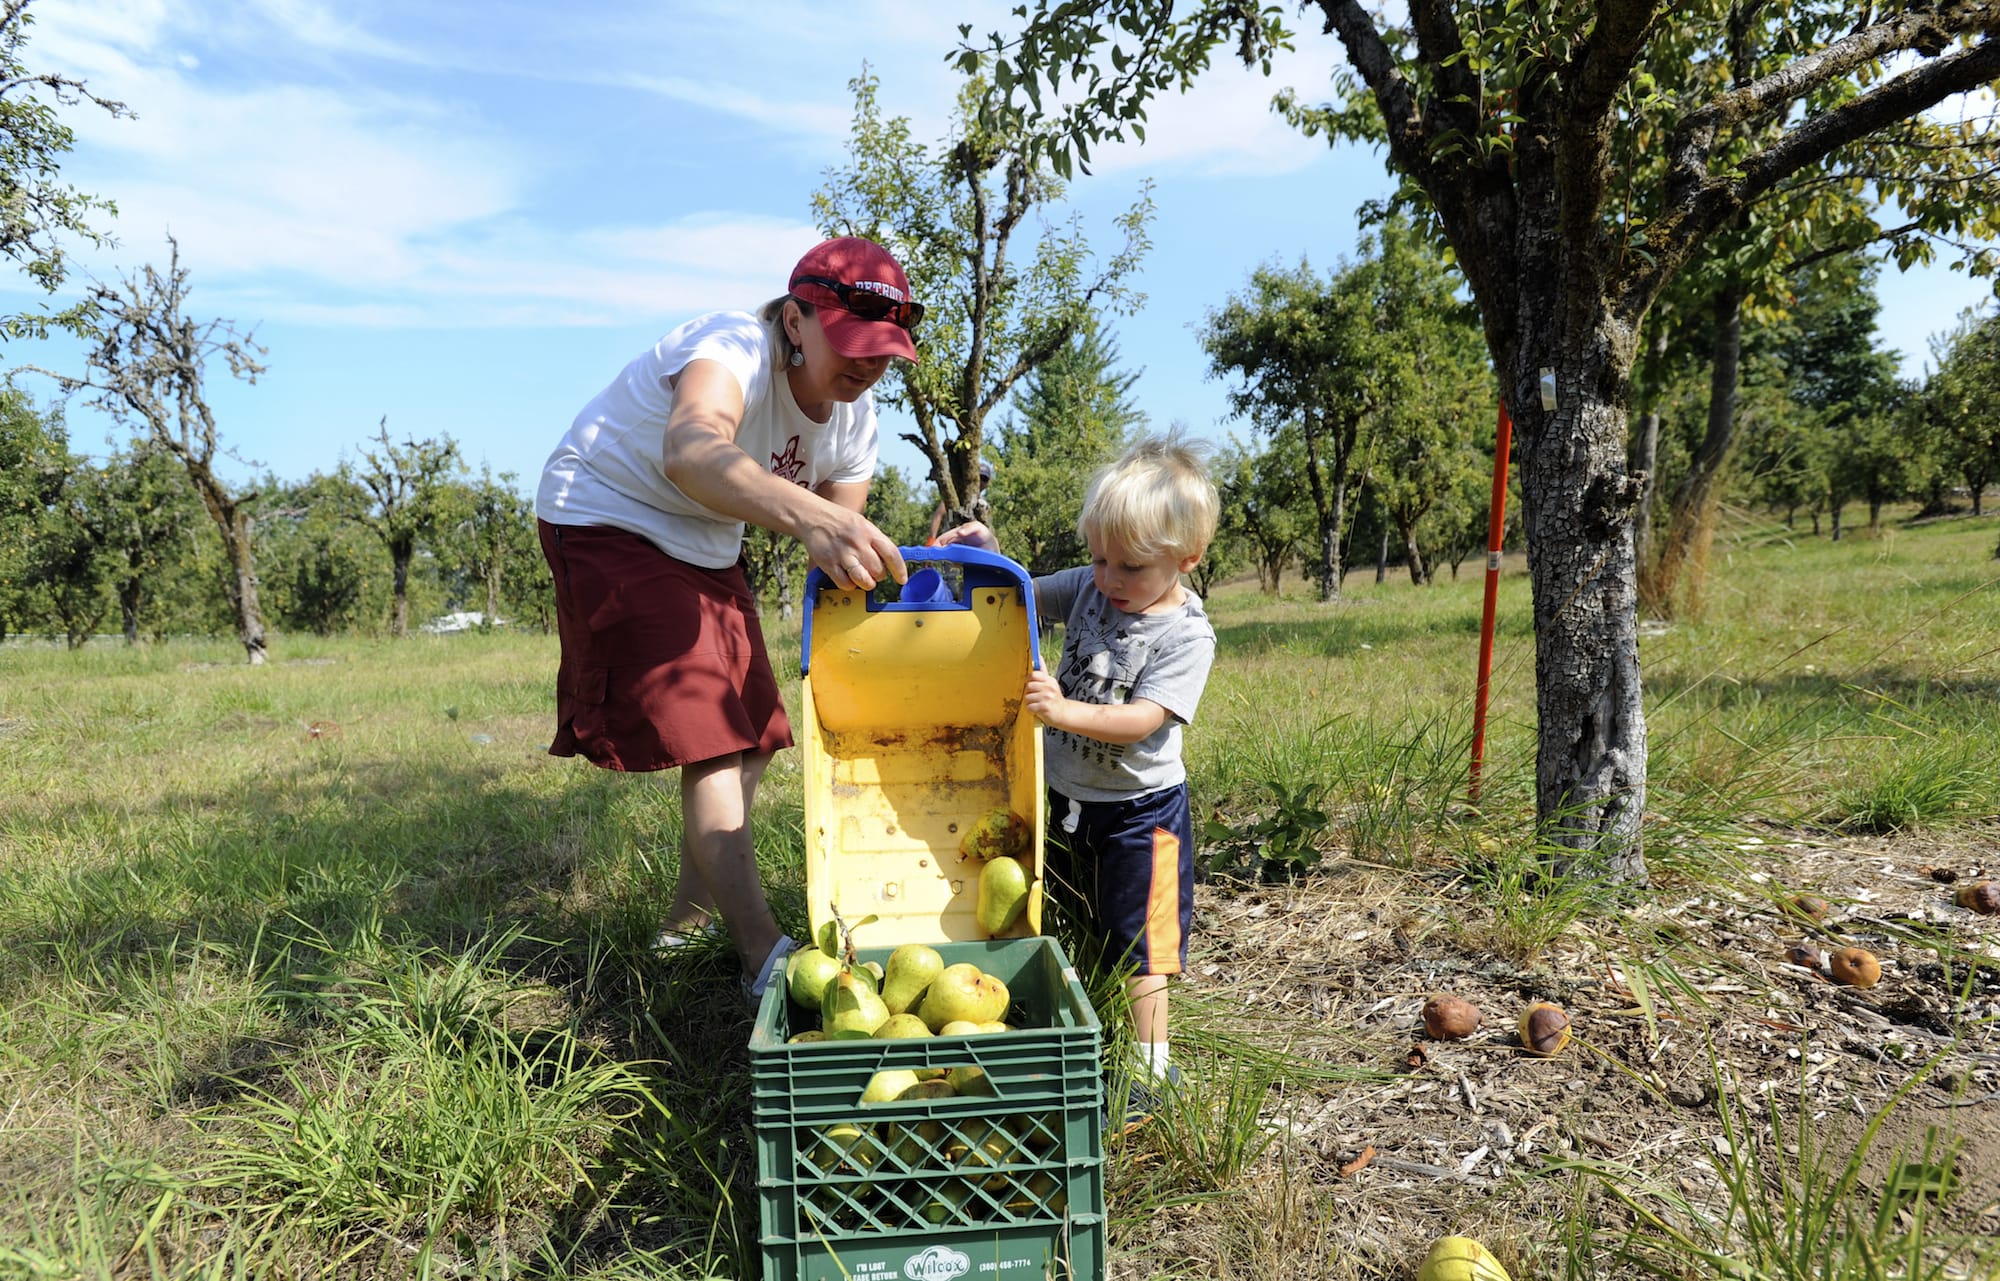 Jane Kleiner, left, helps 2 1/2 -year-old son Jake unload his dump truck while harvesting pears and cleaning up fallen fruit at Foley Park in Felida on Aug.